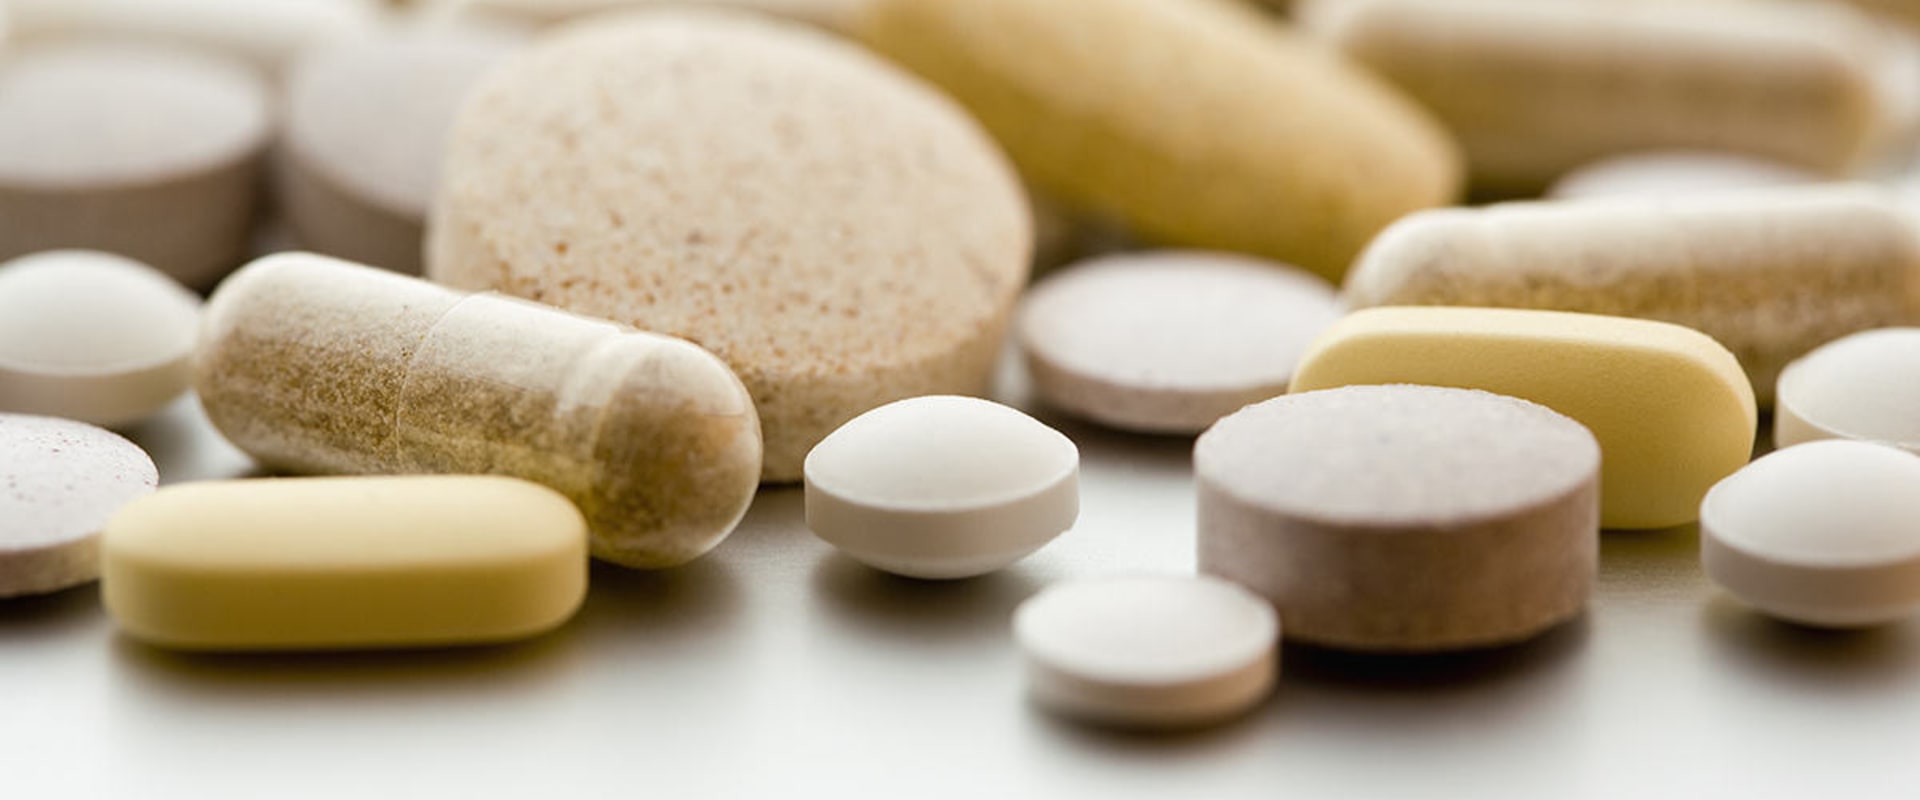 Do I Need to Consult My Doctor Before Taking a Dietary Supplement?